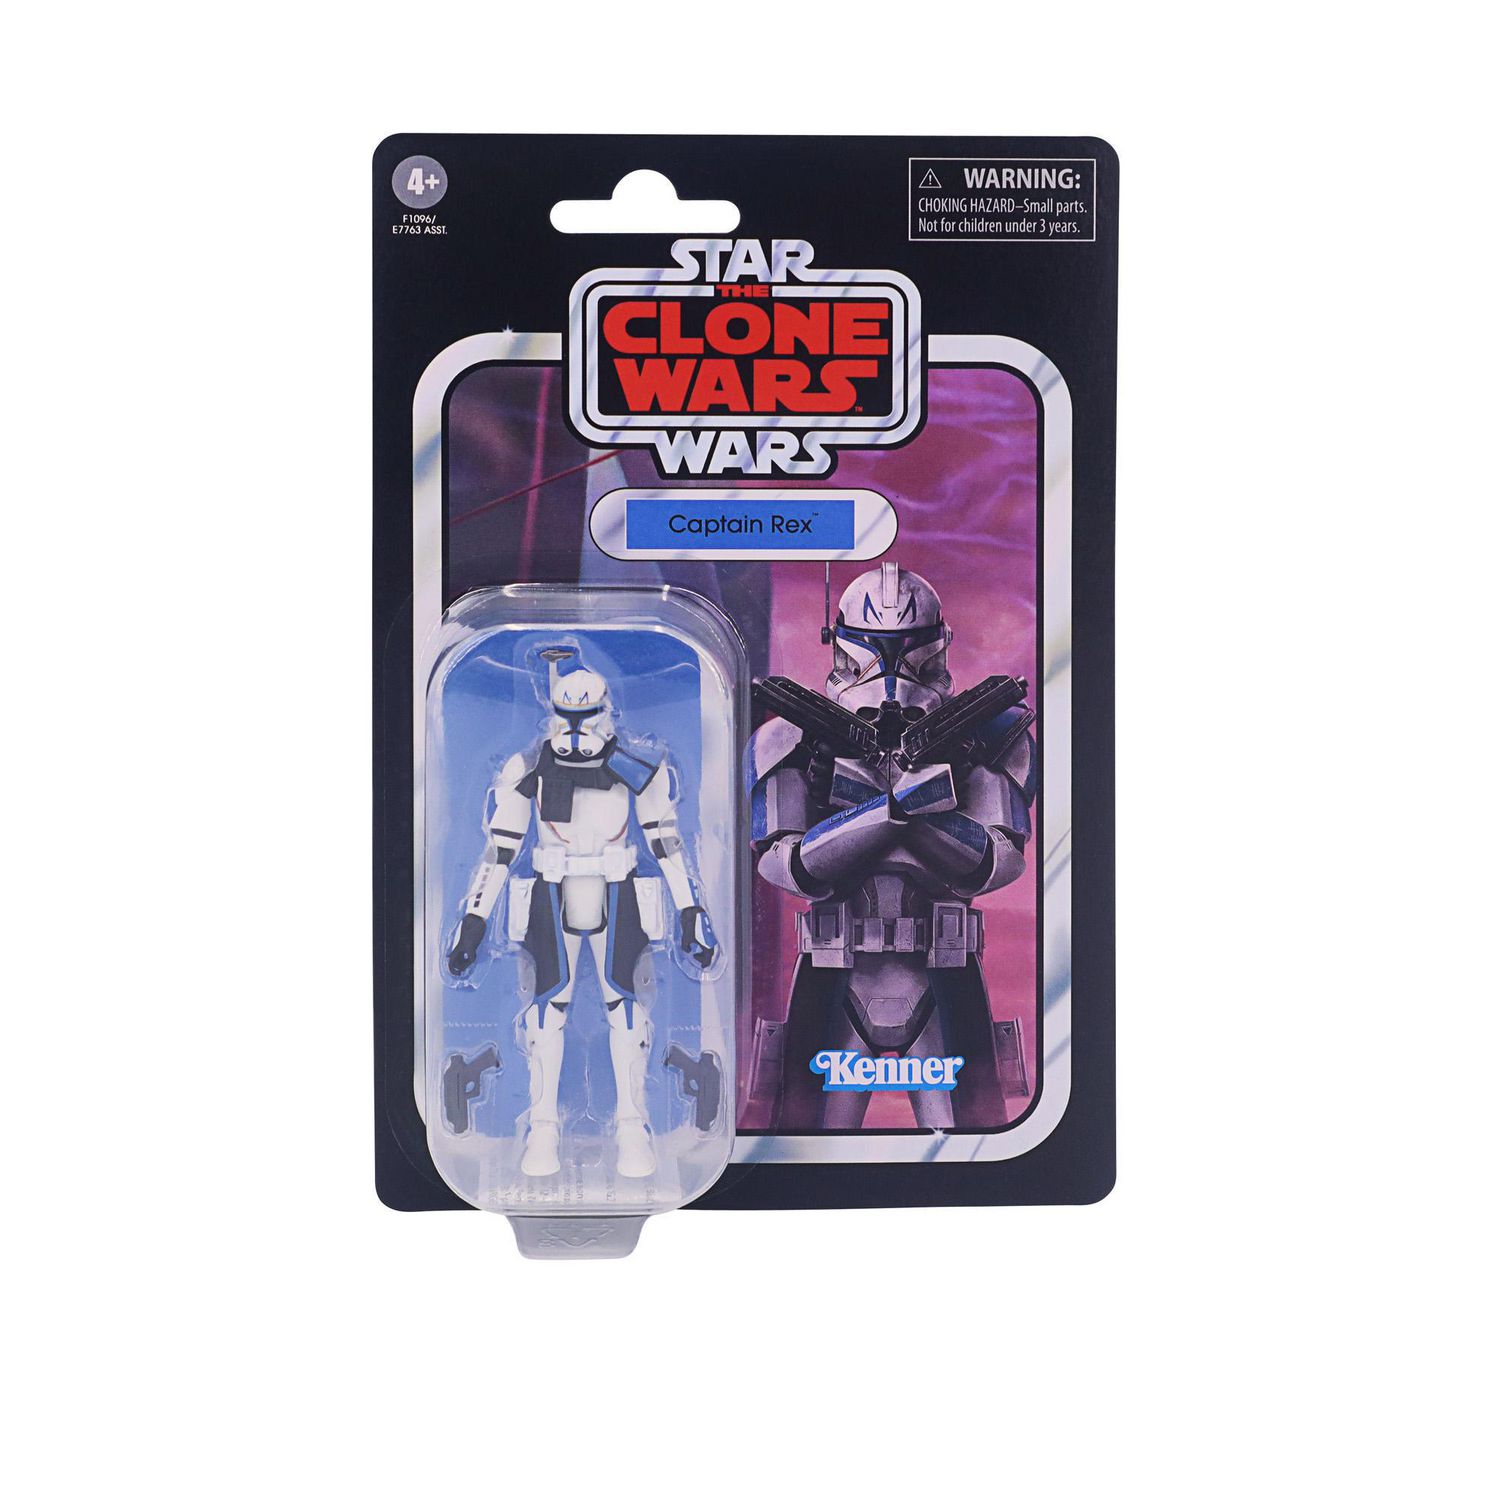 Star Wars The Vintage Collection Captain Rex Toy, 3.75-Inch-Scale Star  Wars: The Clone Wars Action Figure, Toys for Kids Ages 4 and Up